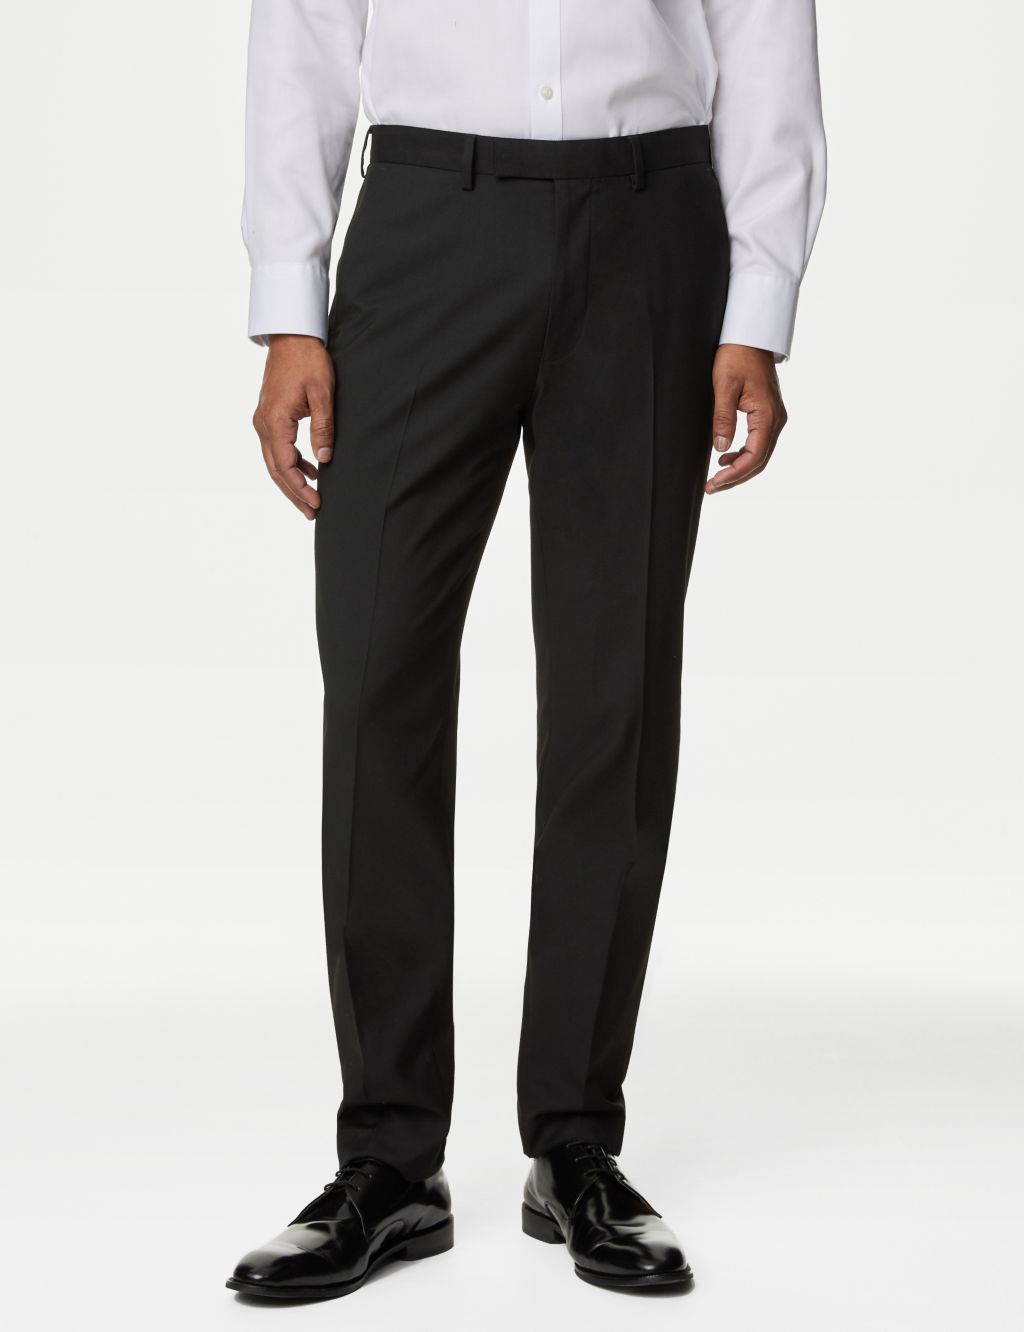 Skinny Fit Stretch Suit Trousers image 1